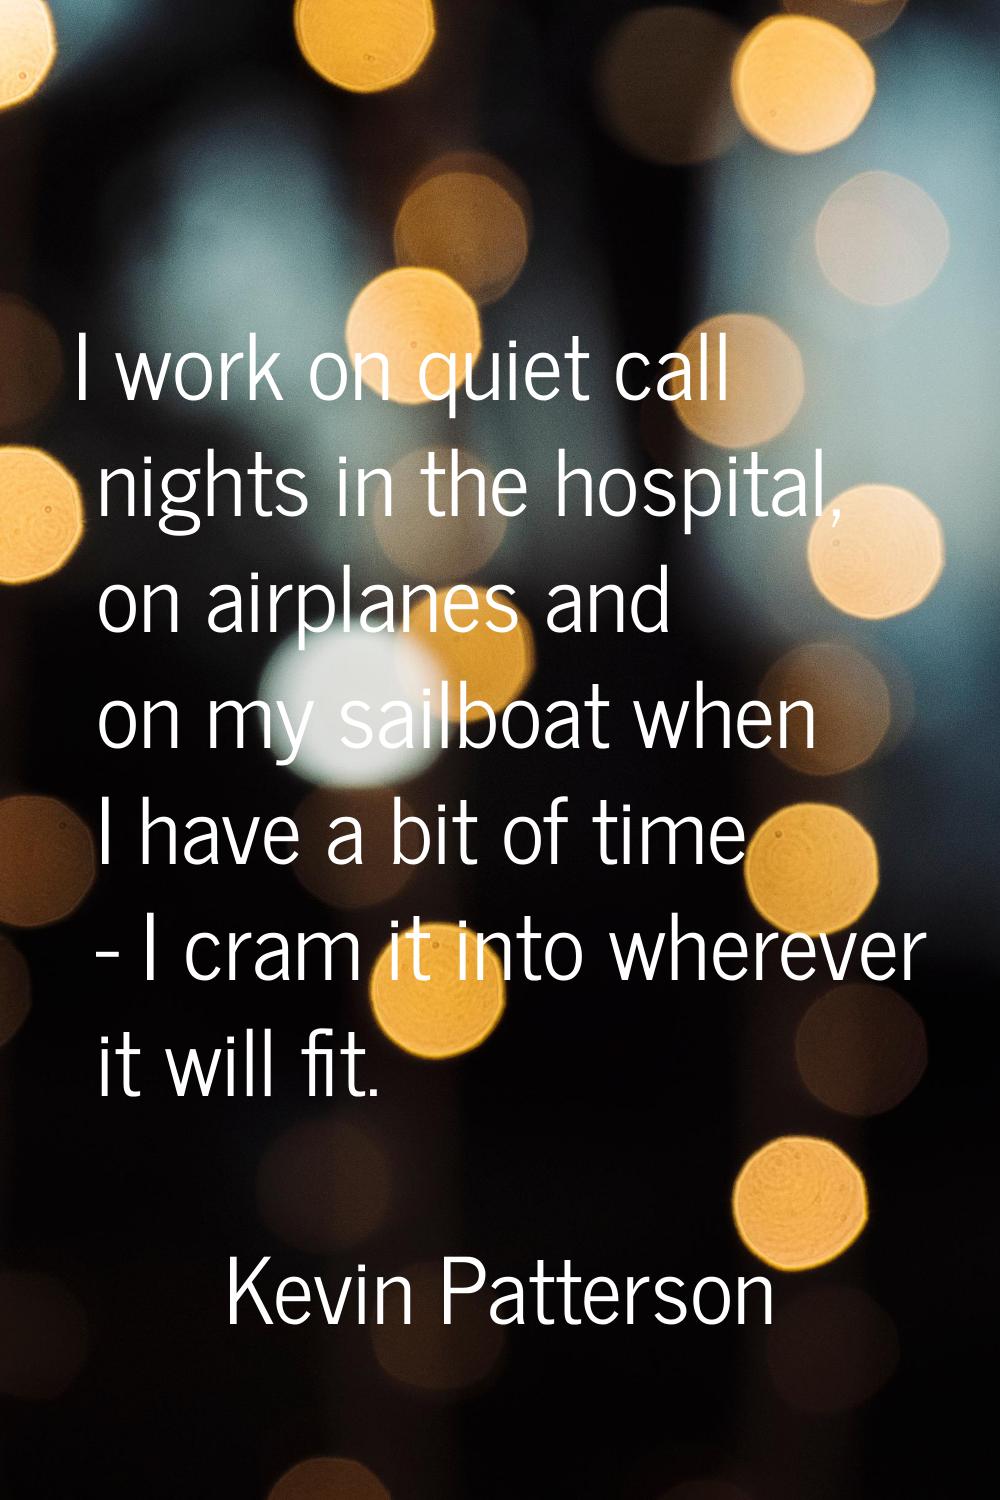 I work on quiet call nights in the hospital, on airplanes and on my sailboat when I have a bit of t